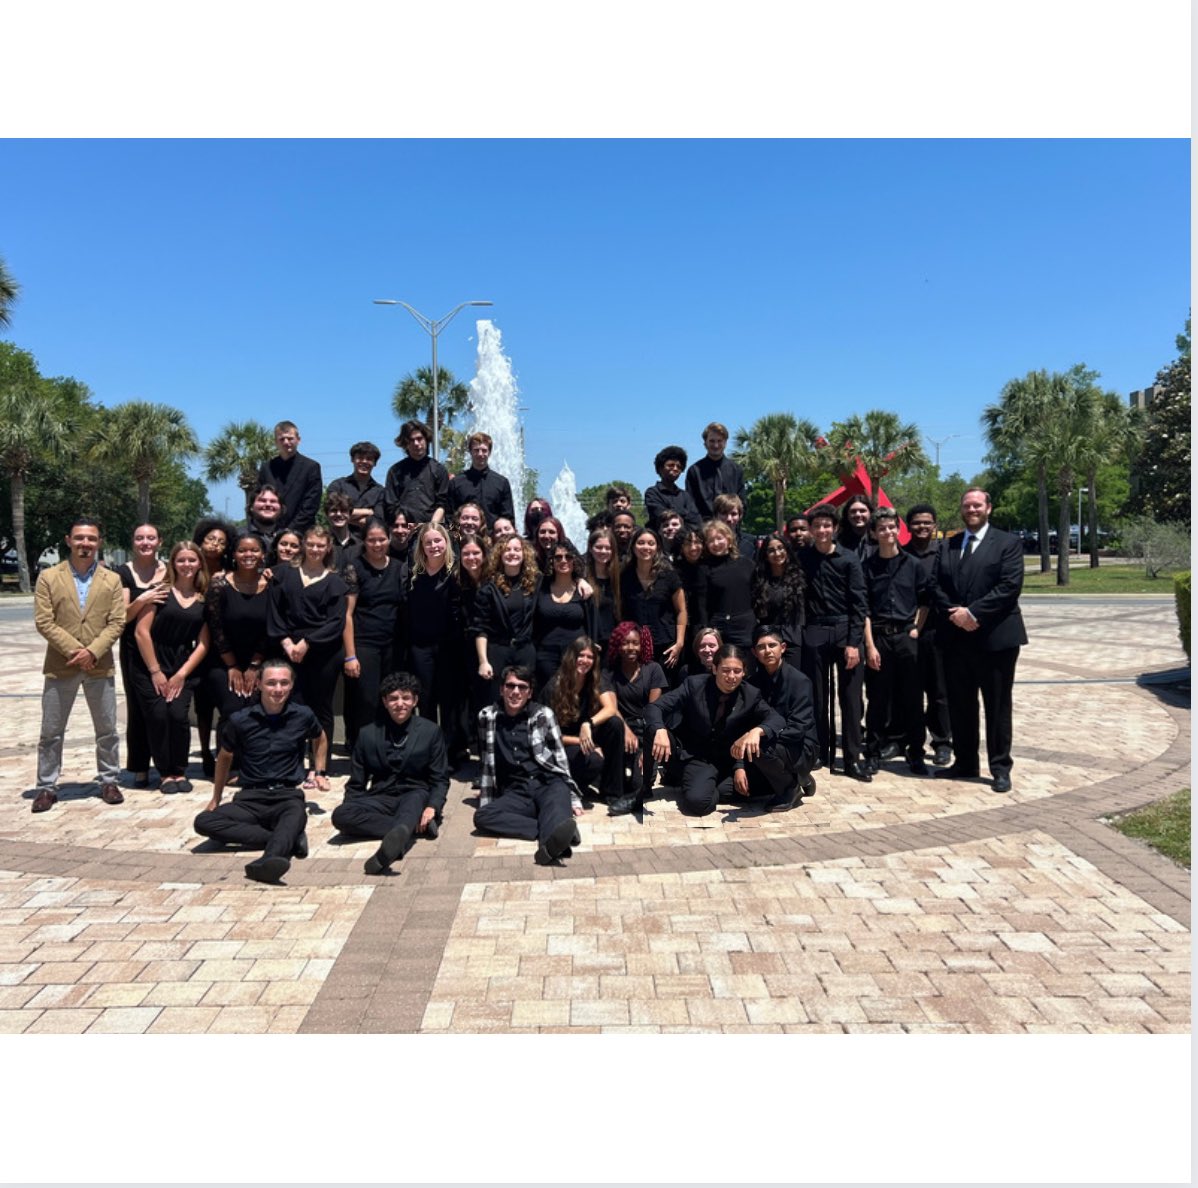 Congratulations to our Wind Ensemble for earning Straight Excellents at State Concert MPA today! We are proud of you. 💙💛🐊🎶